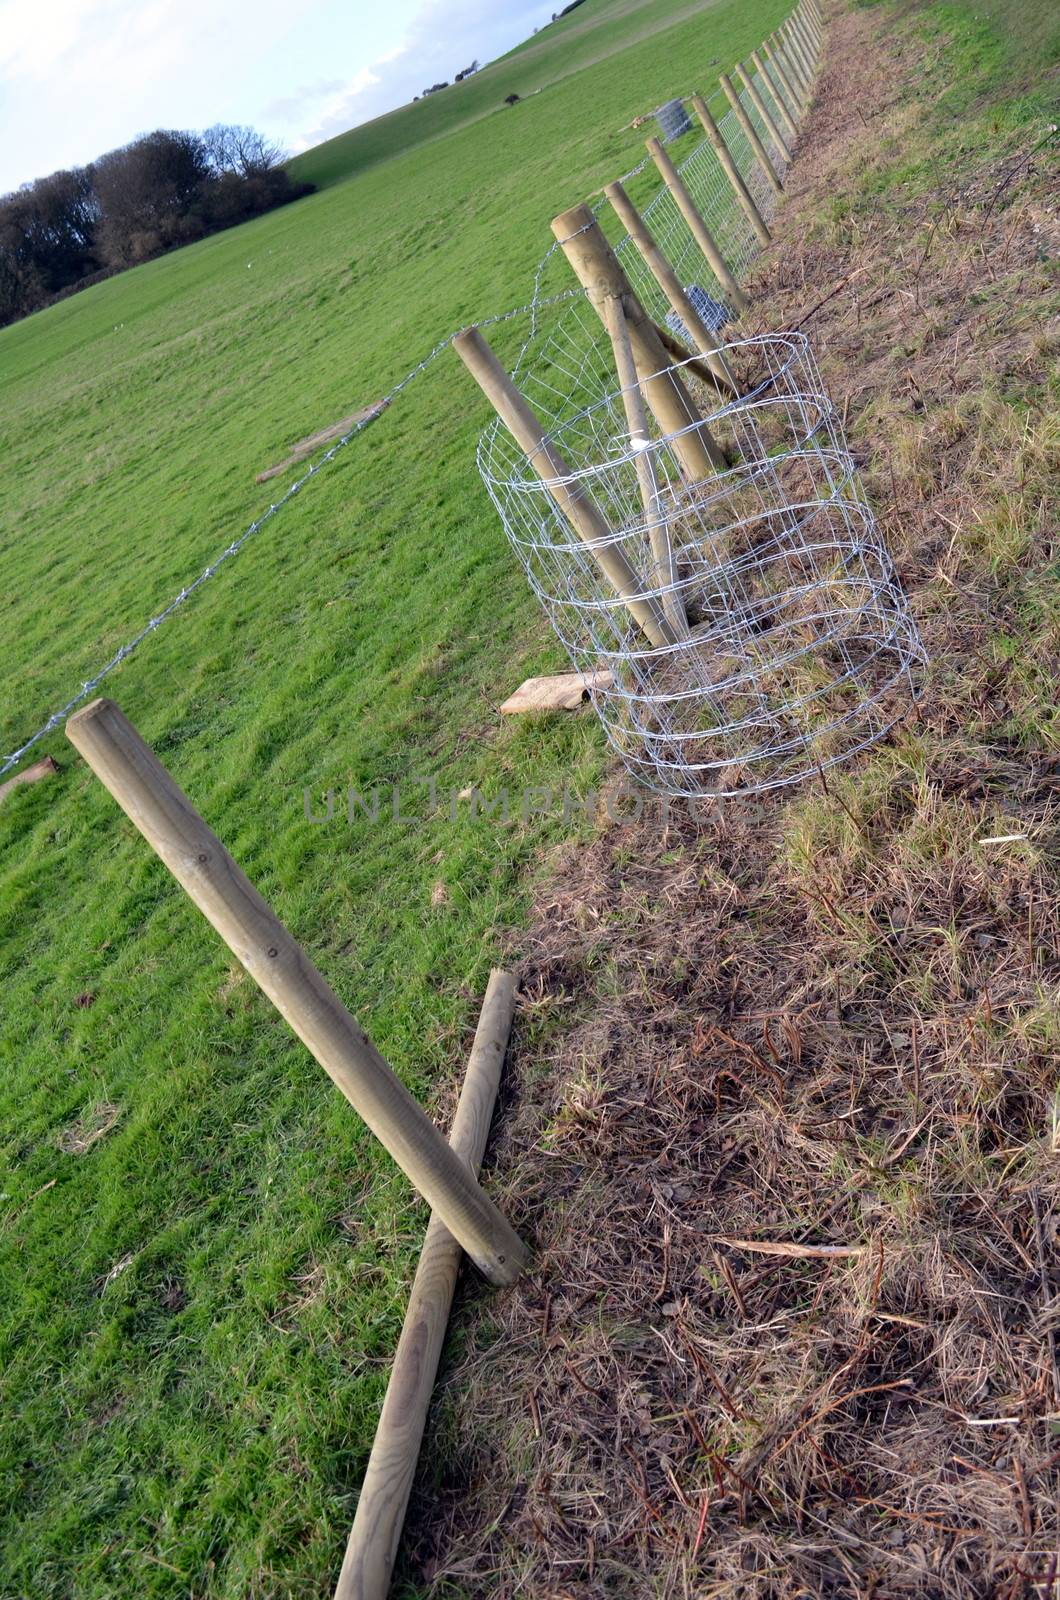 New farm fencing being installed on a pasture field.